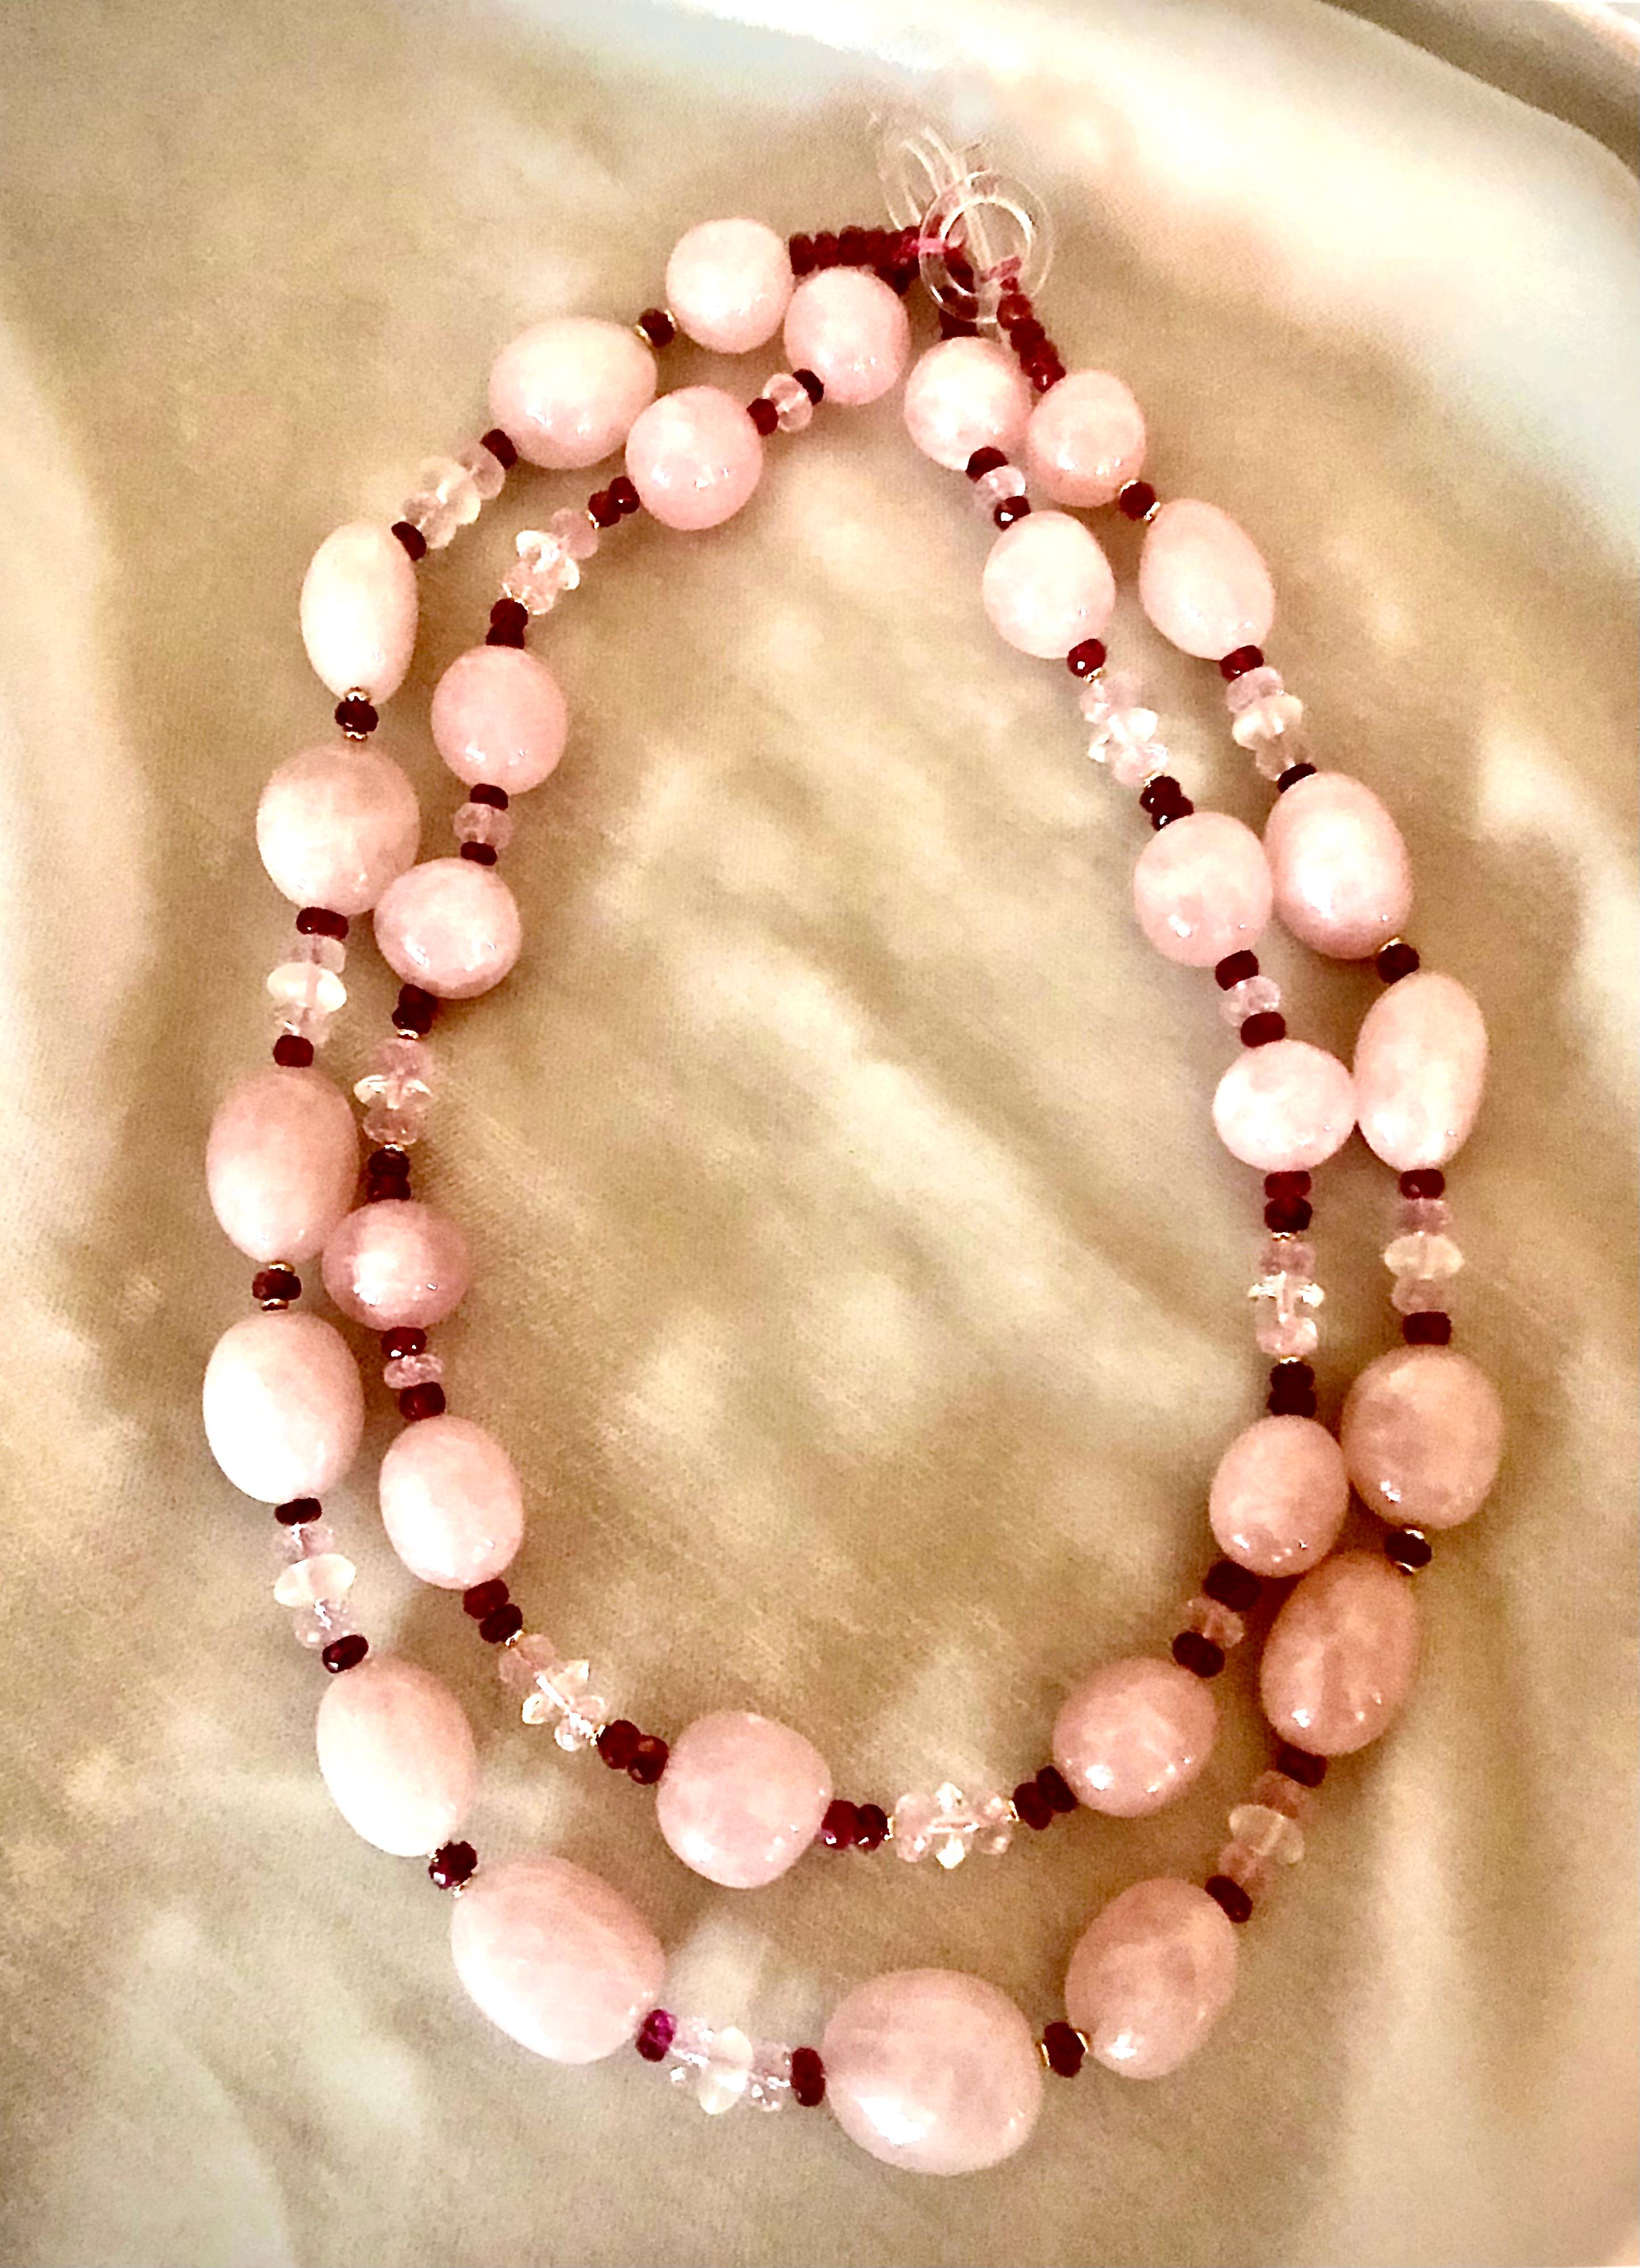 Pretty pink but still quite sophisticated and chic necklace. The major element of this pair of necklaces is beautiful very slightly peach sugary pink translucent rose quartz large beads. Beads range in size from approximately 20mm to 8.5mm

Flanking